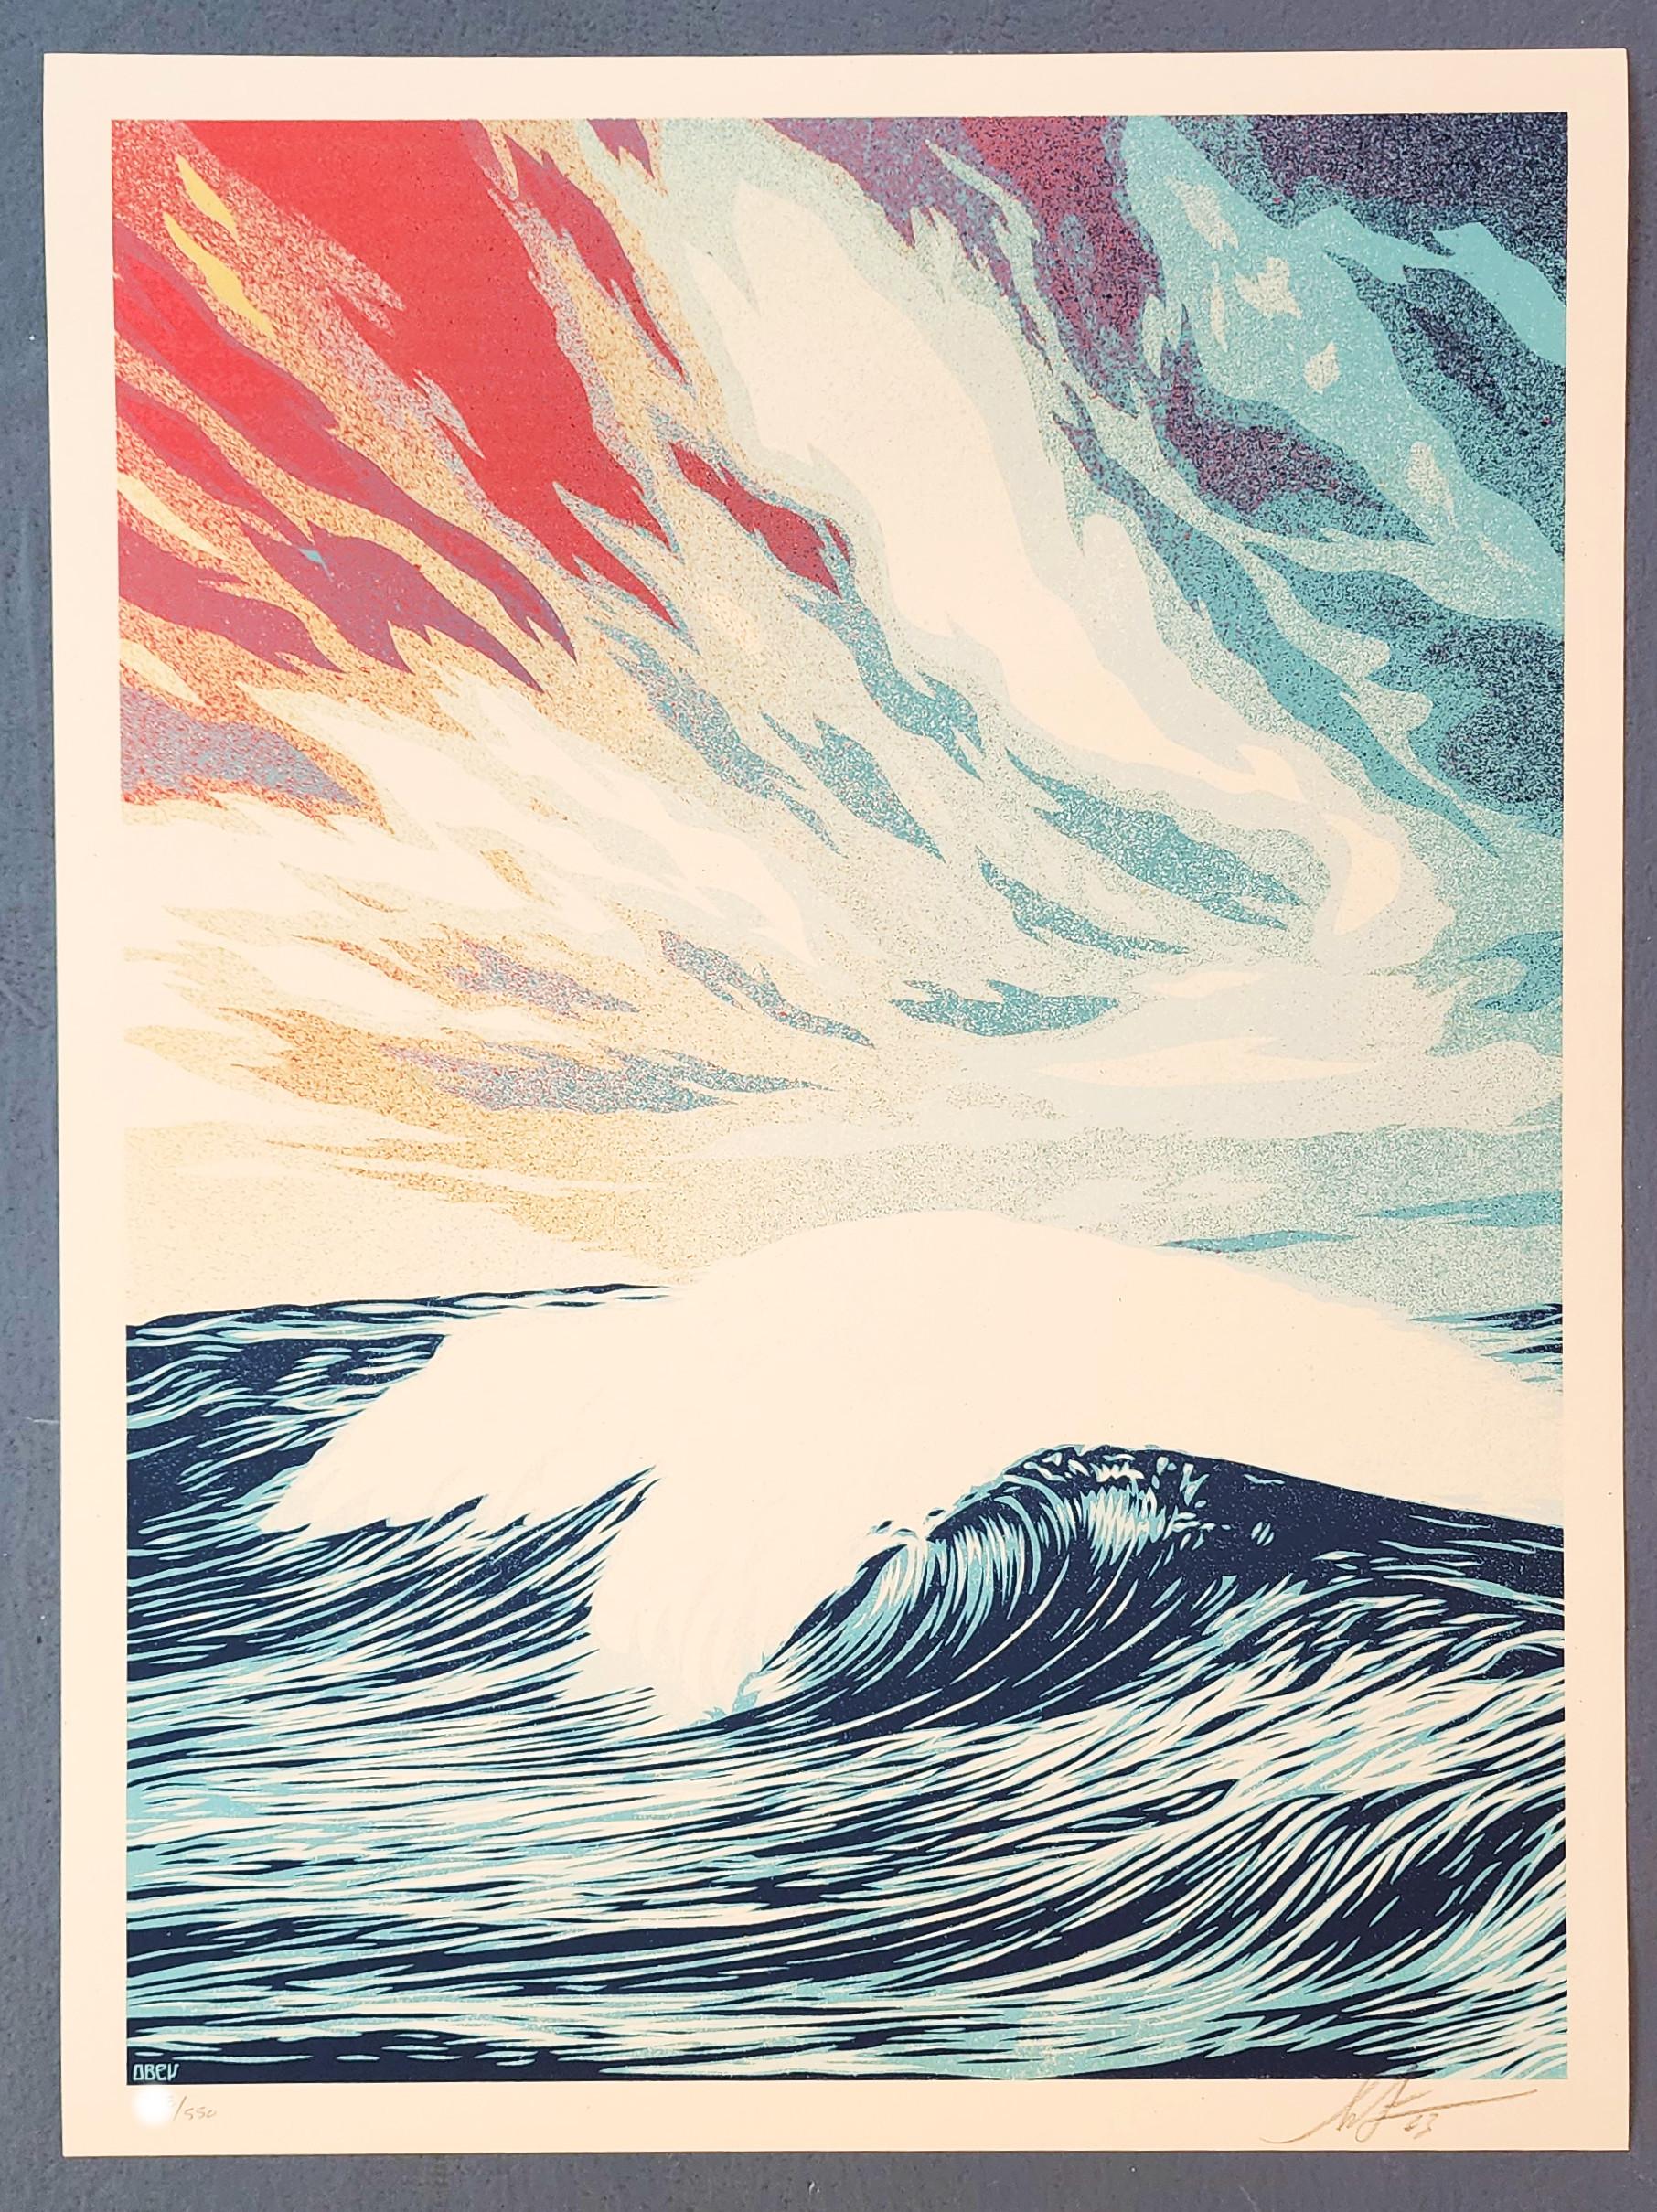 Force of Nature (Awareness, Respect, Climate Change, Iconic - ~49% OFF) - Contemporary Print by Shepard Fairey